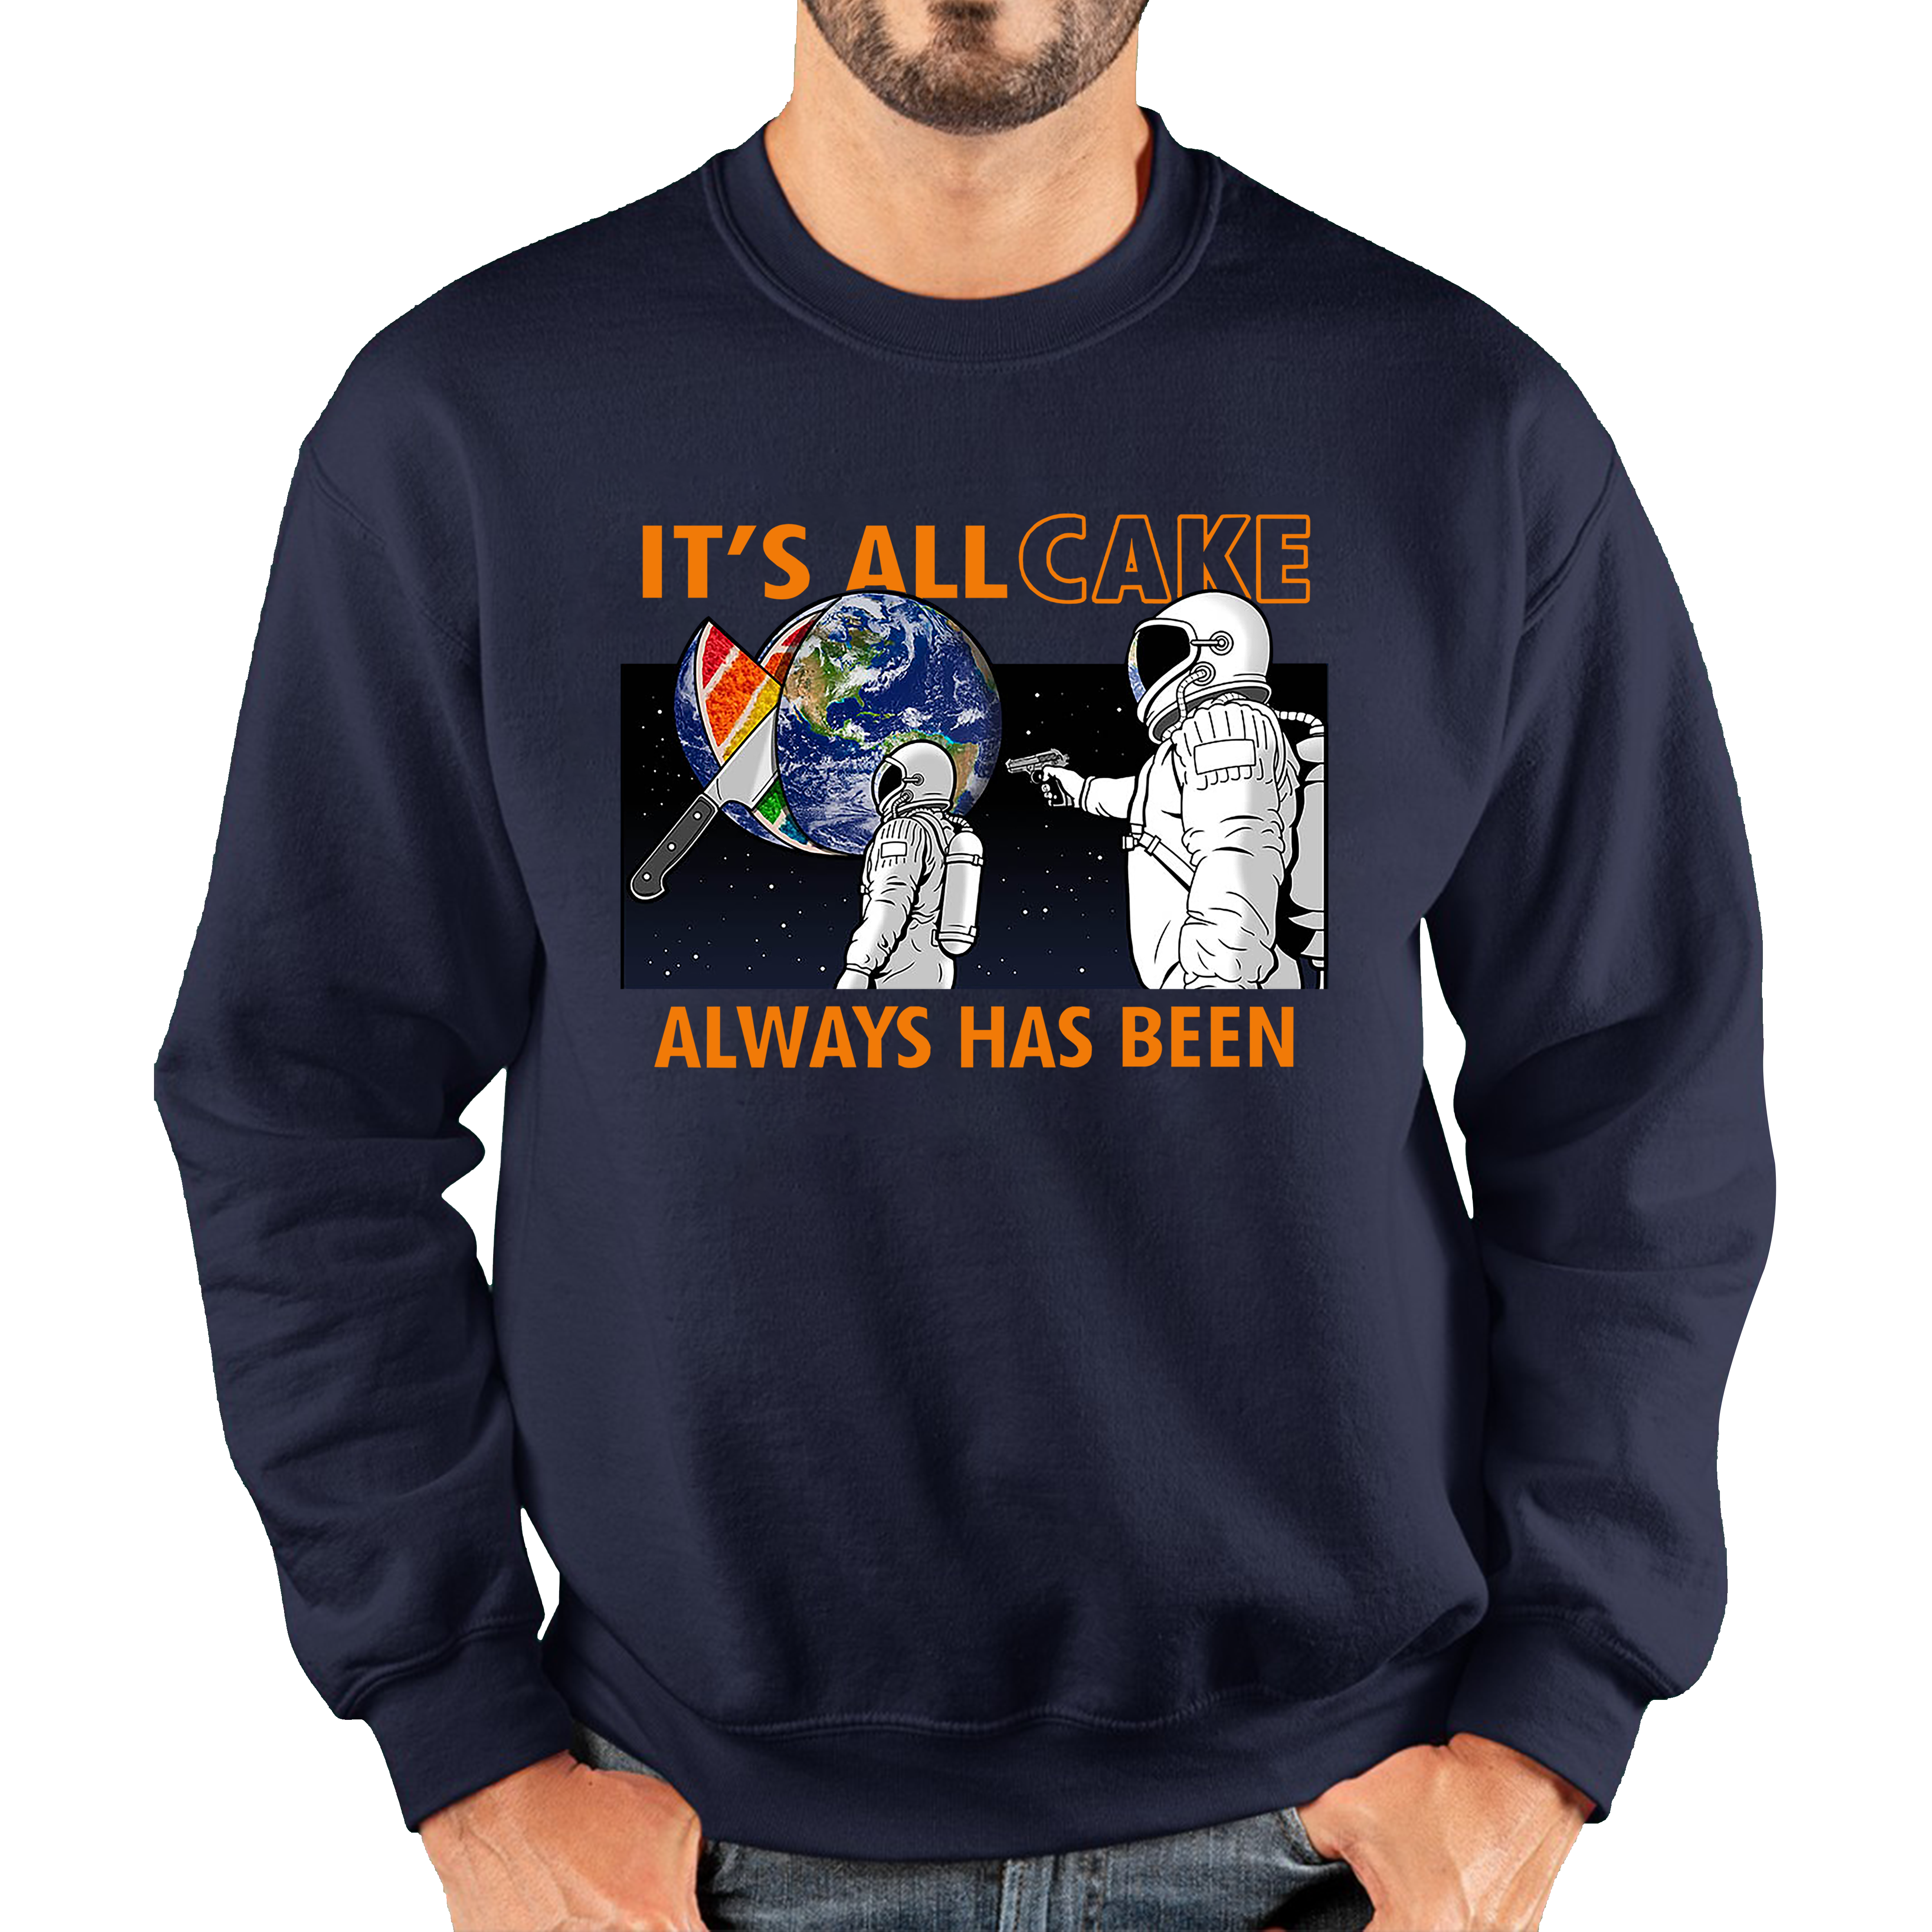 It's All Cake (Always Has Been) Astronaut Space Picture Funny Saying Novelty Meme Adult Sweatshirt